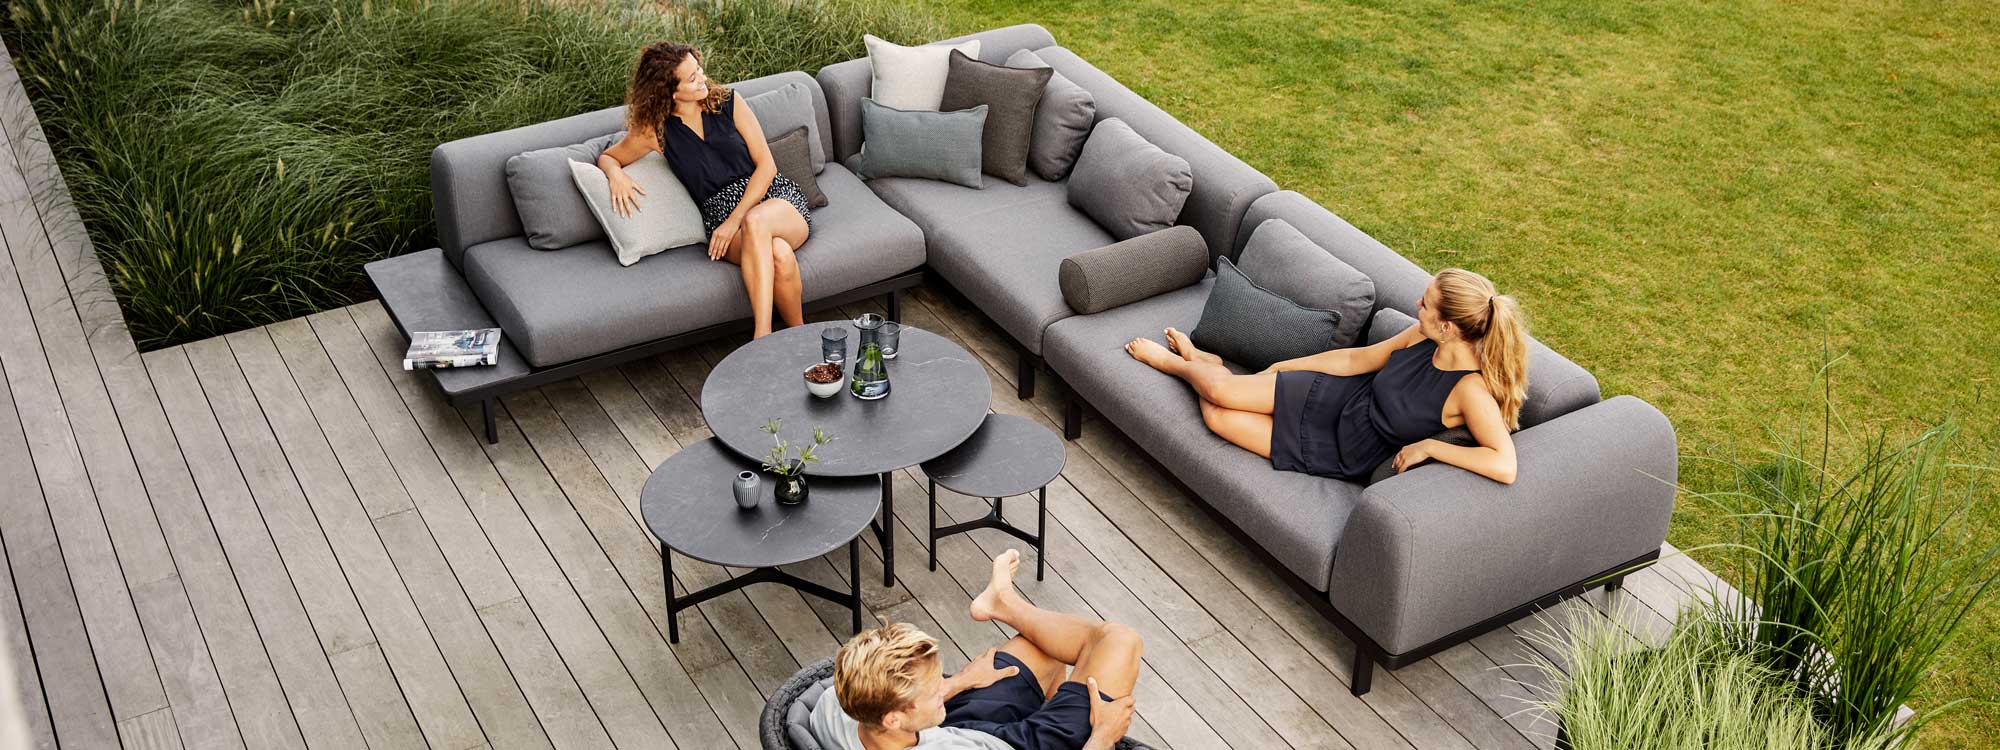 Image of 2 women sat on dark-grey Space modern garden sofa with Twist low tables in the centre by Caneline